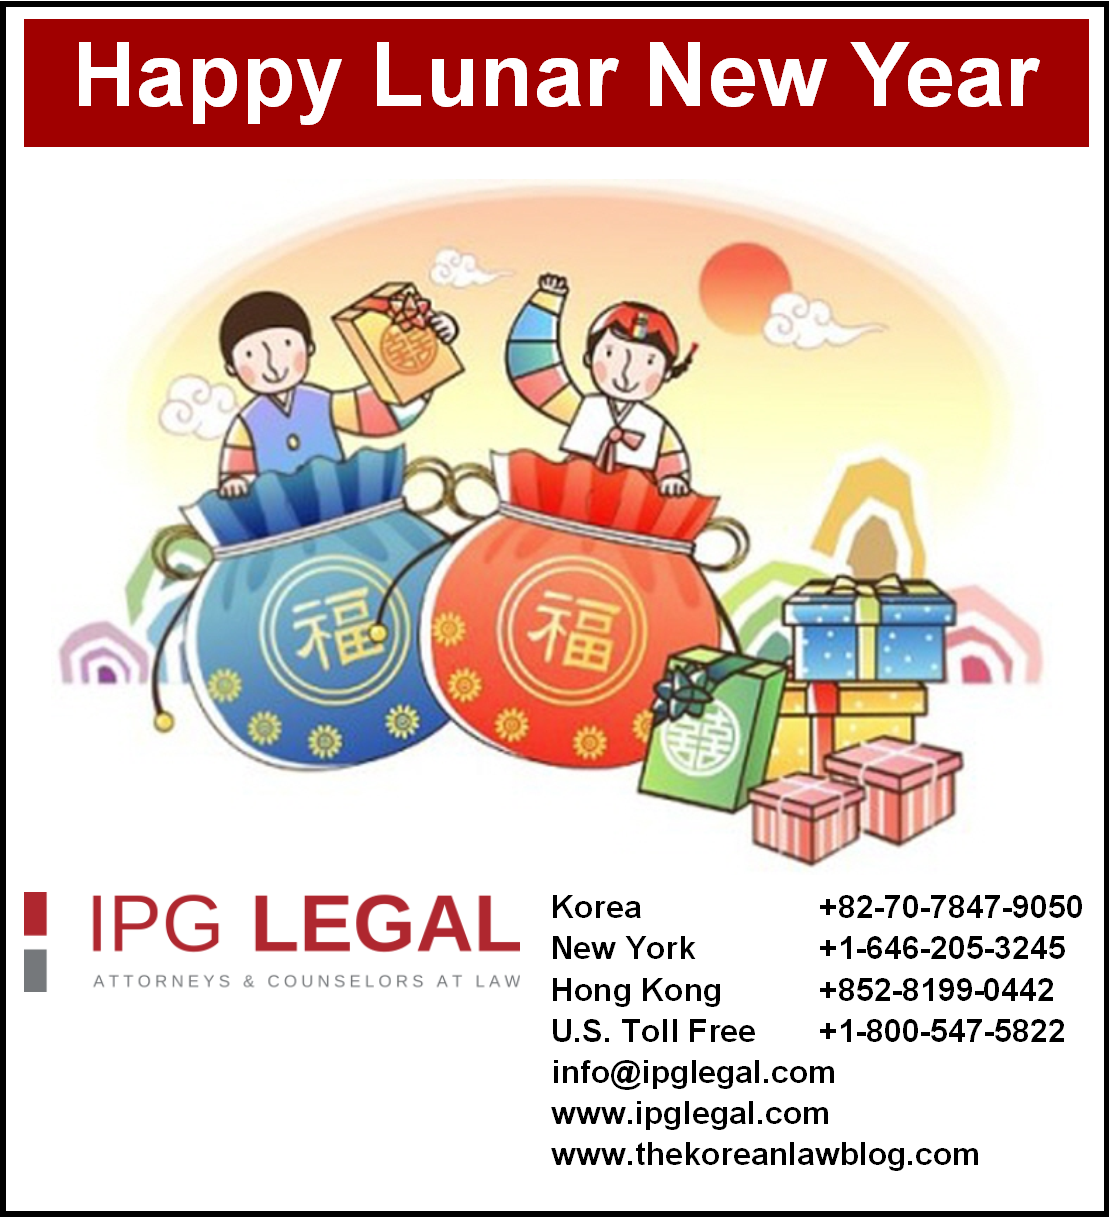 The Korean Law Blog | IPG Legal Int'l Law Firm: Happy Lunar New Year